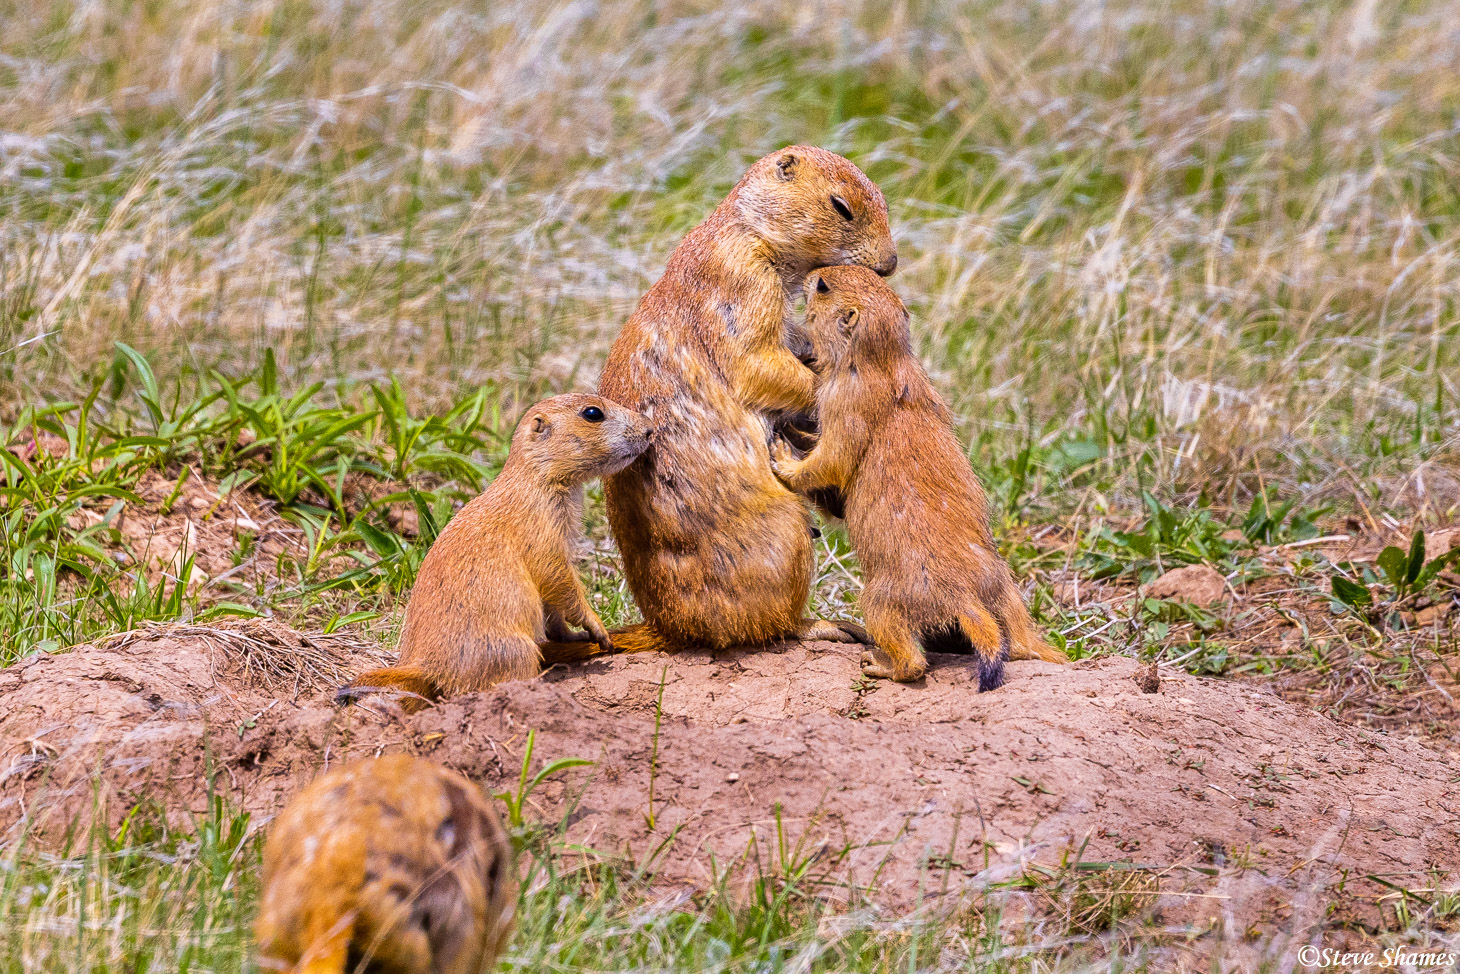 Life in a South Dakota prairie dog town. They look very happy.